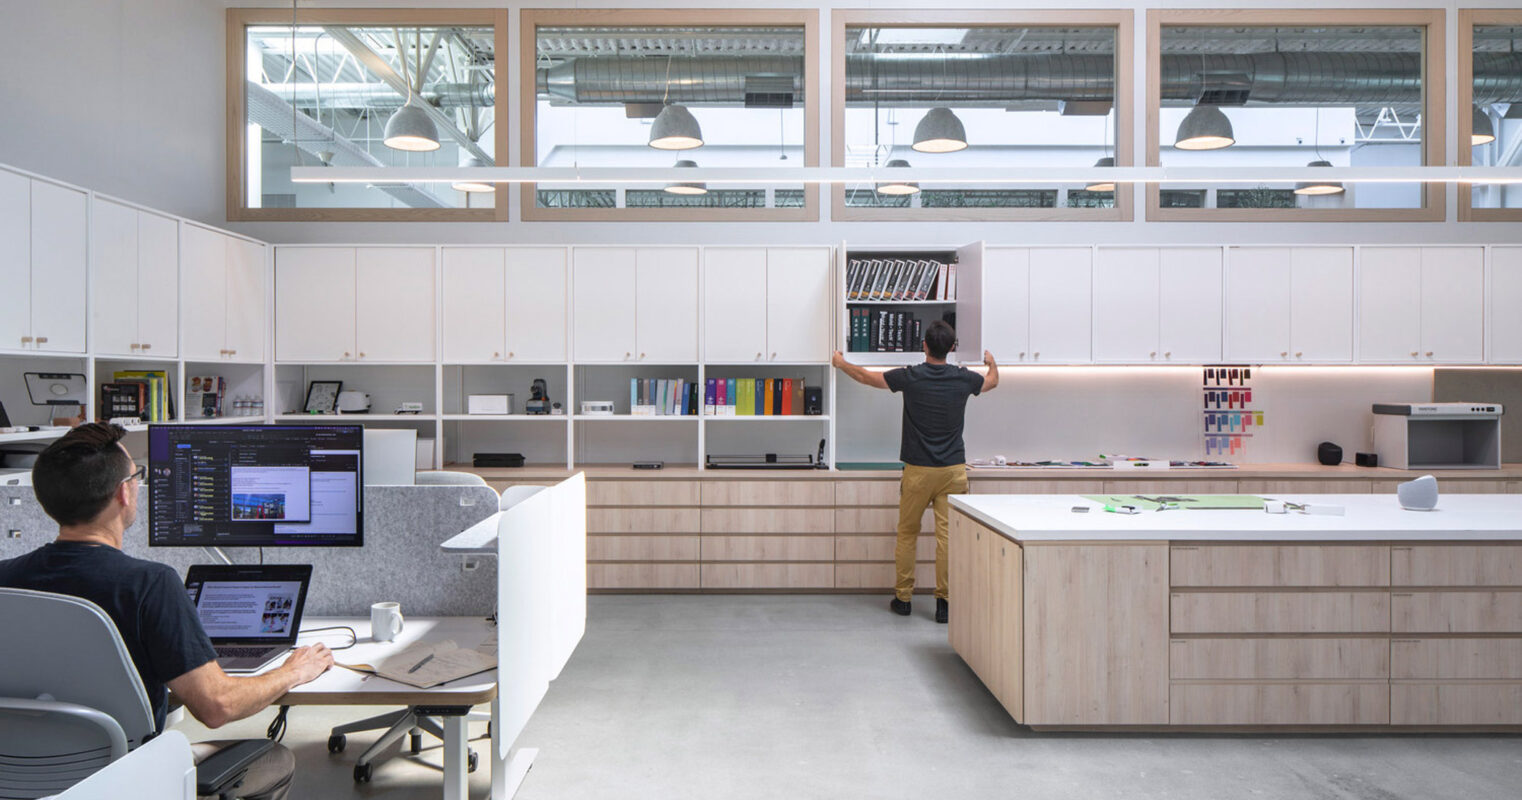 Modern open-plan office featuring natural wood finishes, with workstations, shelving units, and pendant lighting. An individual interacts with material samples on the back wall, emphasizing the space's functional design intent.